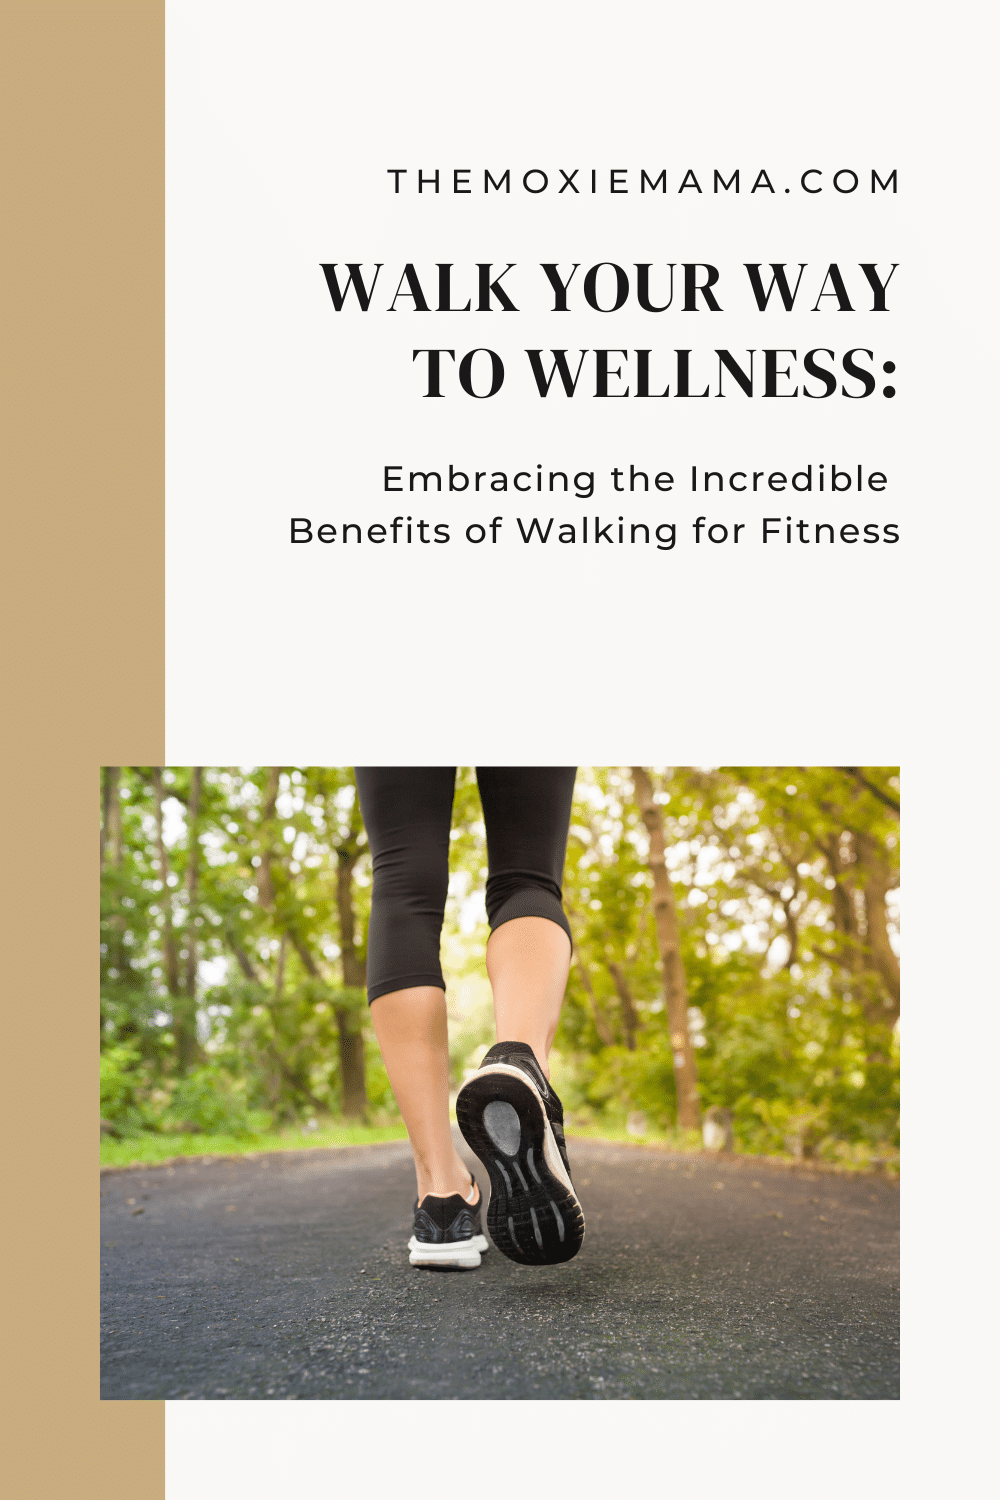 Let's lace up our sneakers and explore how putting one foot in front of the other can lead you on a journey to improved fitness and a healthier lifestyle. Continue reading at: themoxiemama.com